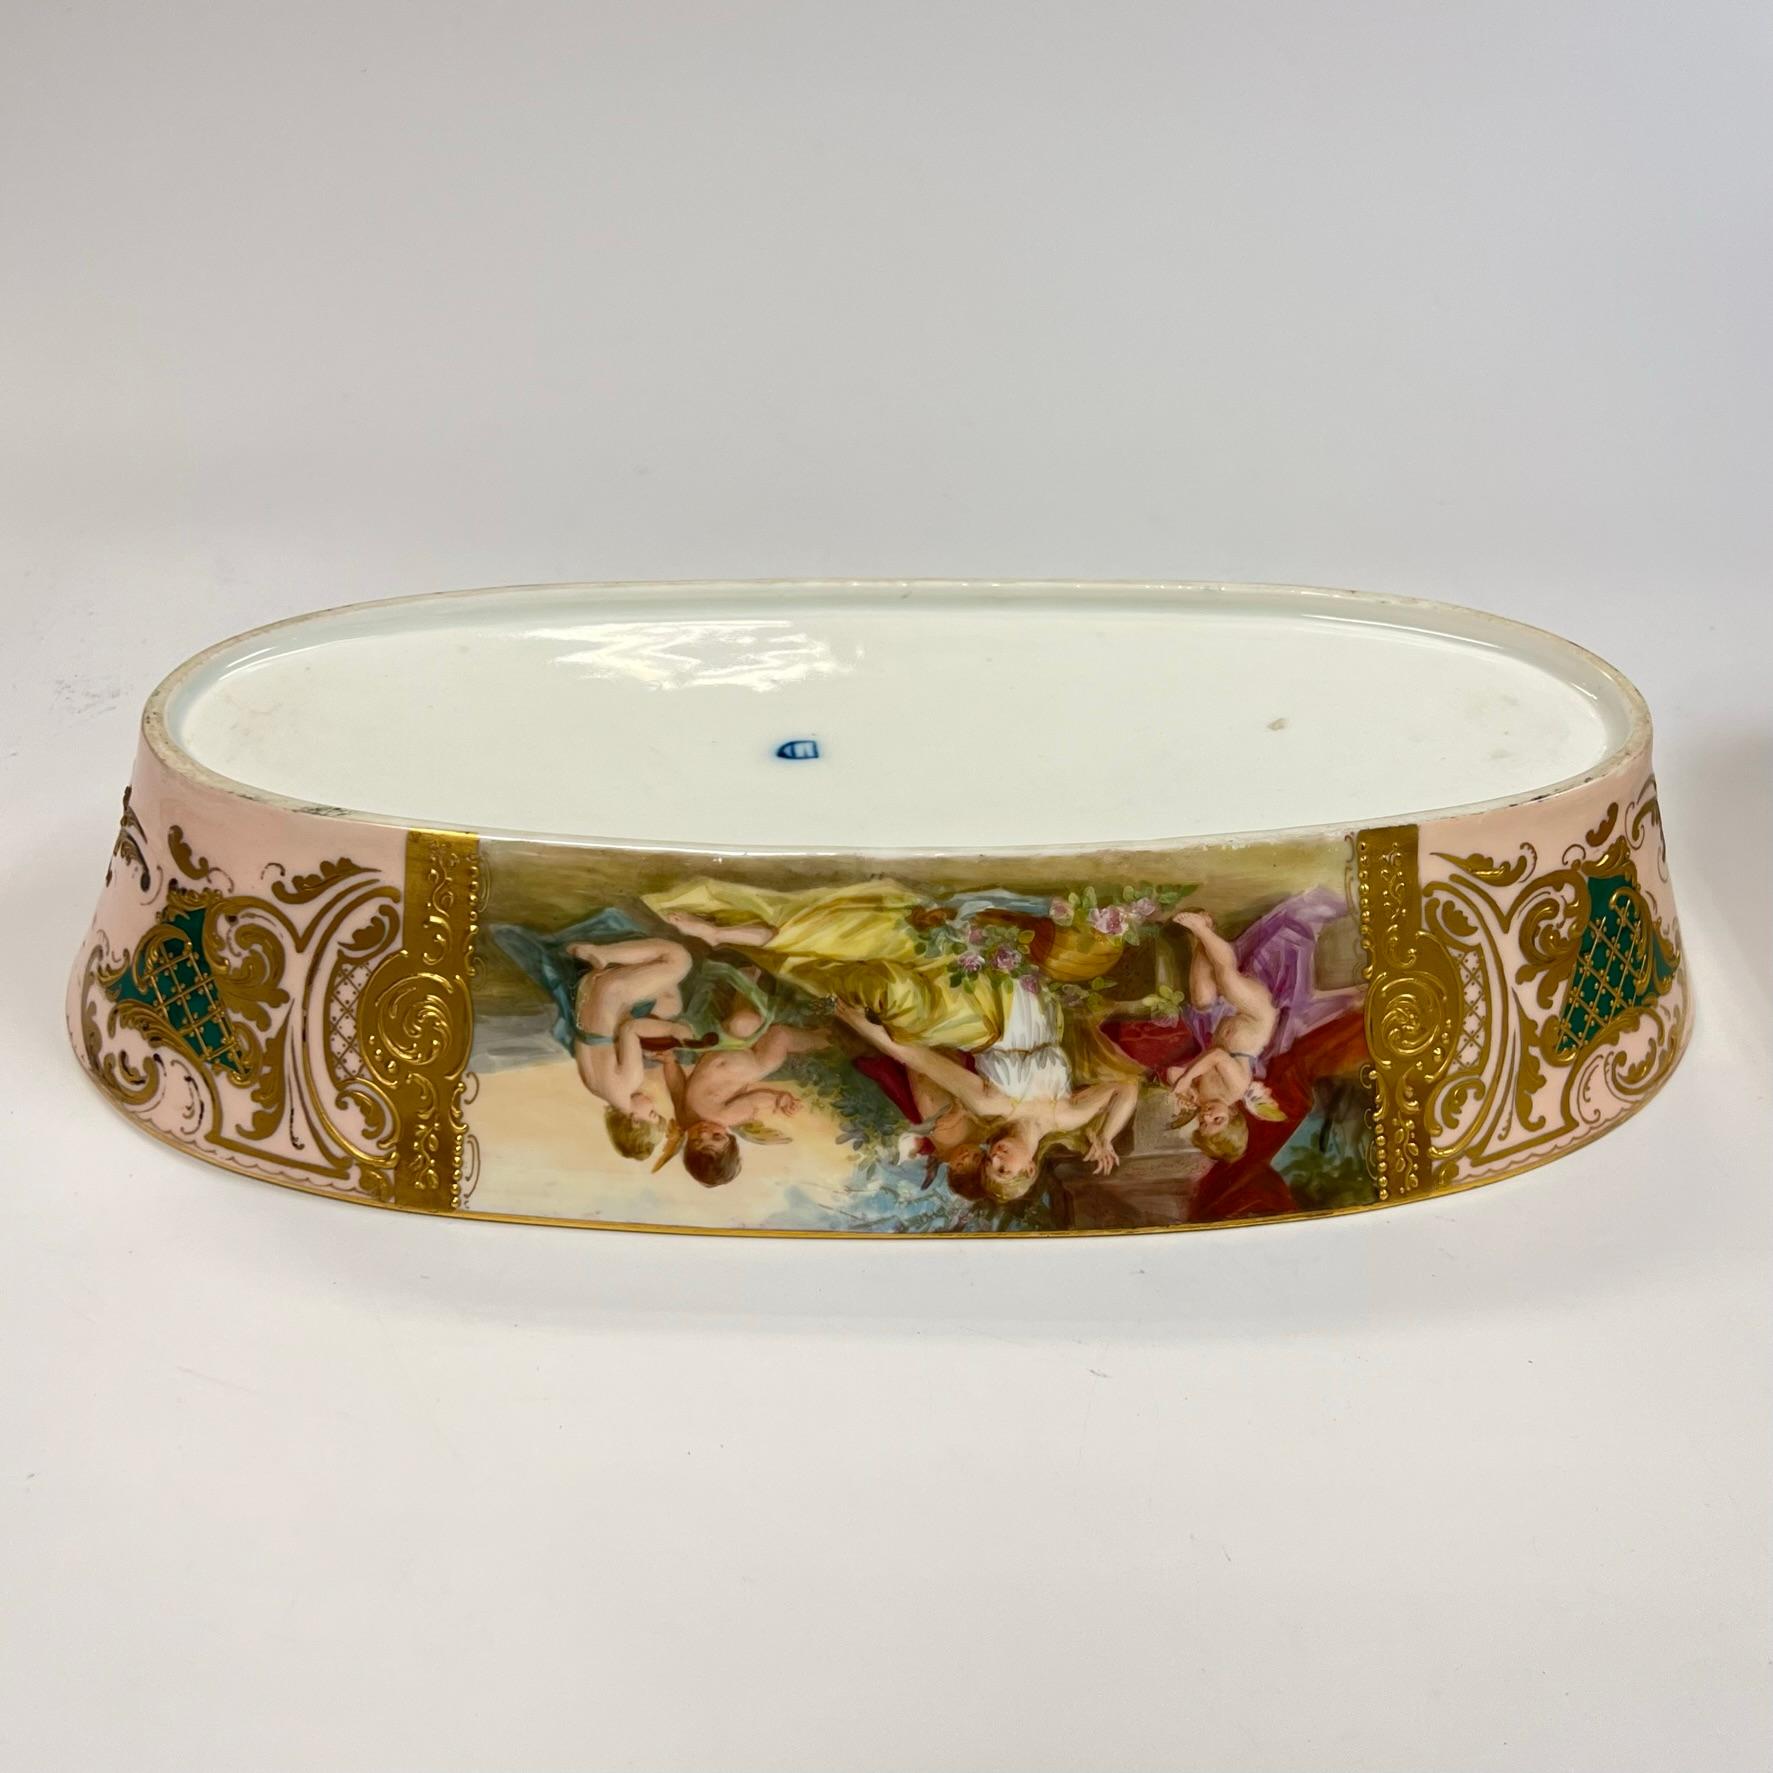 19th Century Porcelain Centerpiece Bowl / Jardiniere on Stand from Royal Vienna For Sale 8